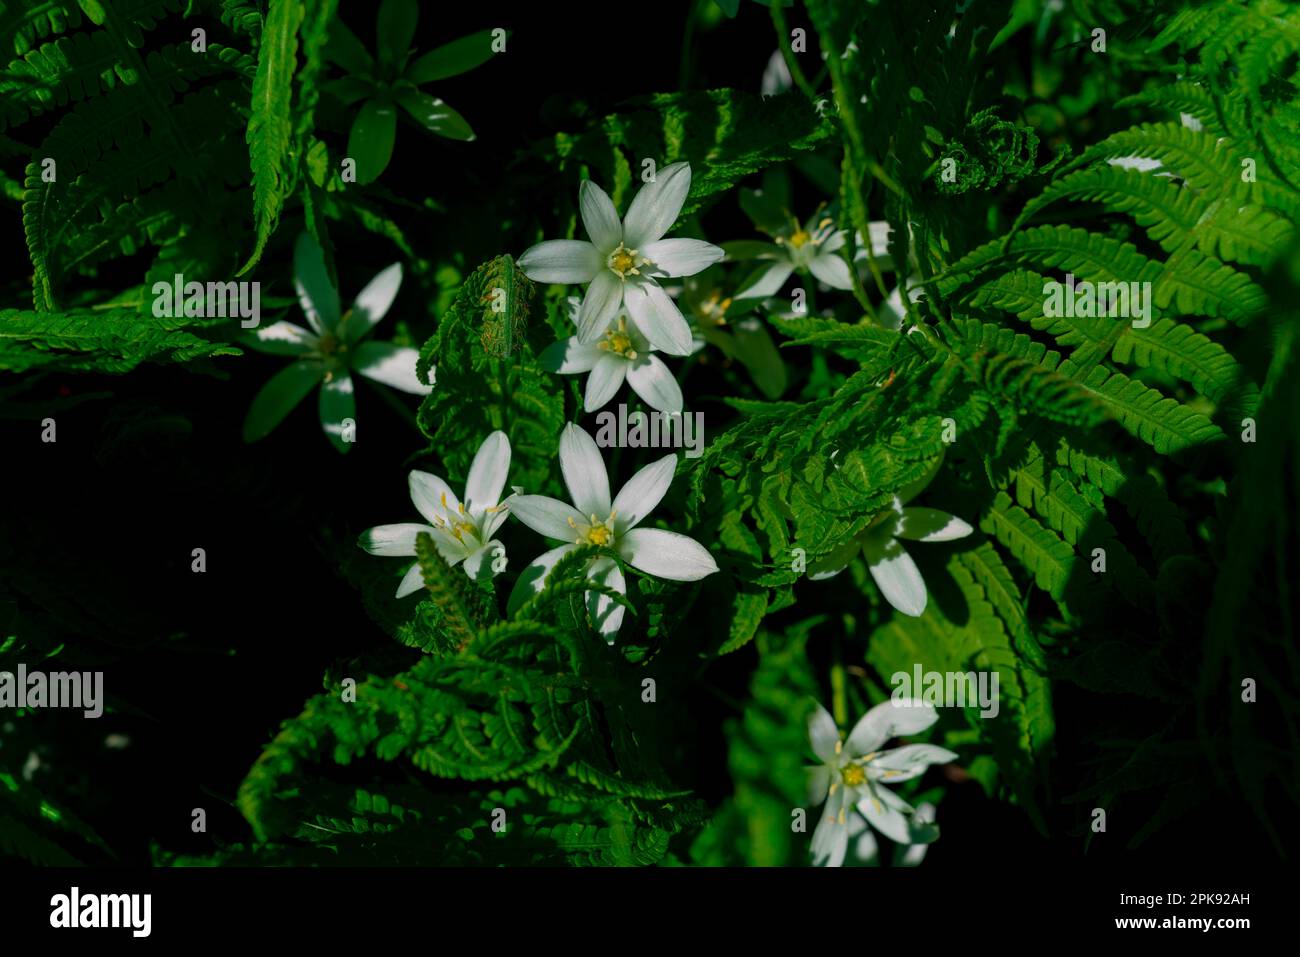 White star-shaped flower petals between green fern plants in spring Stock Photo